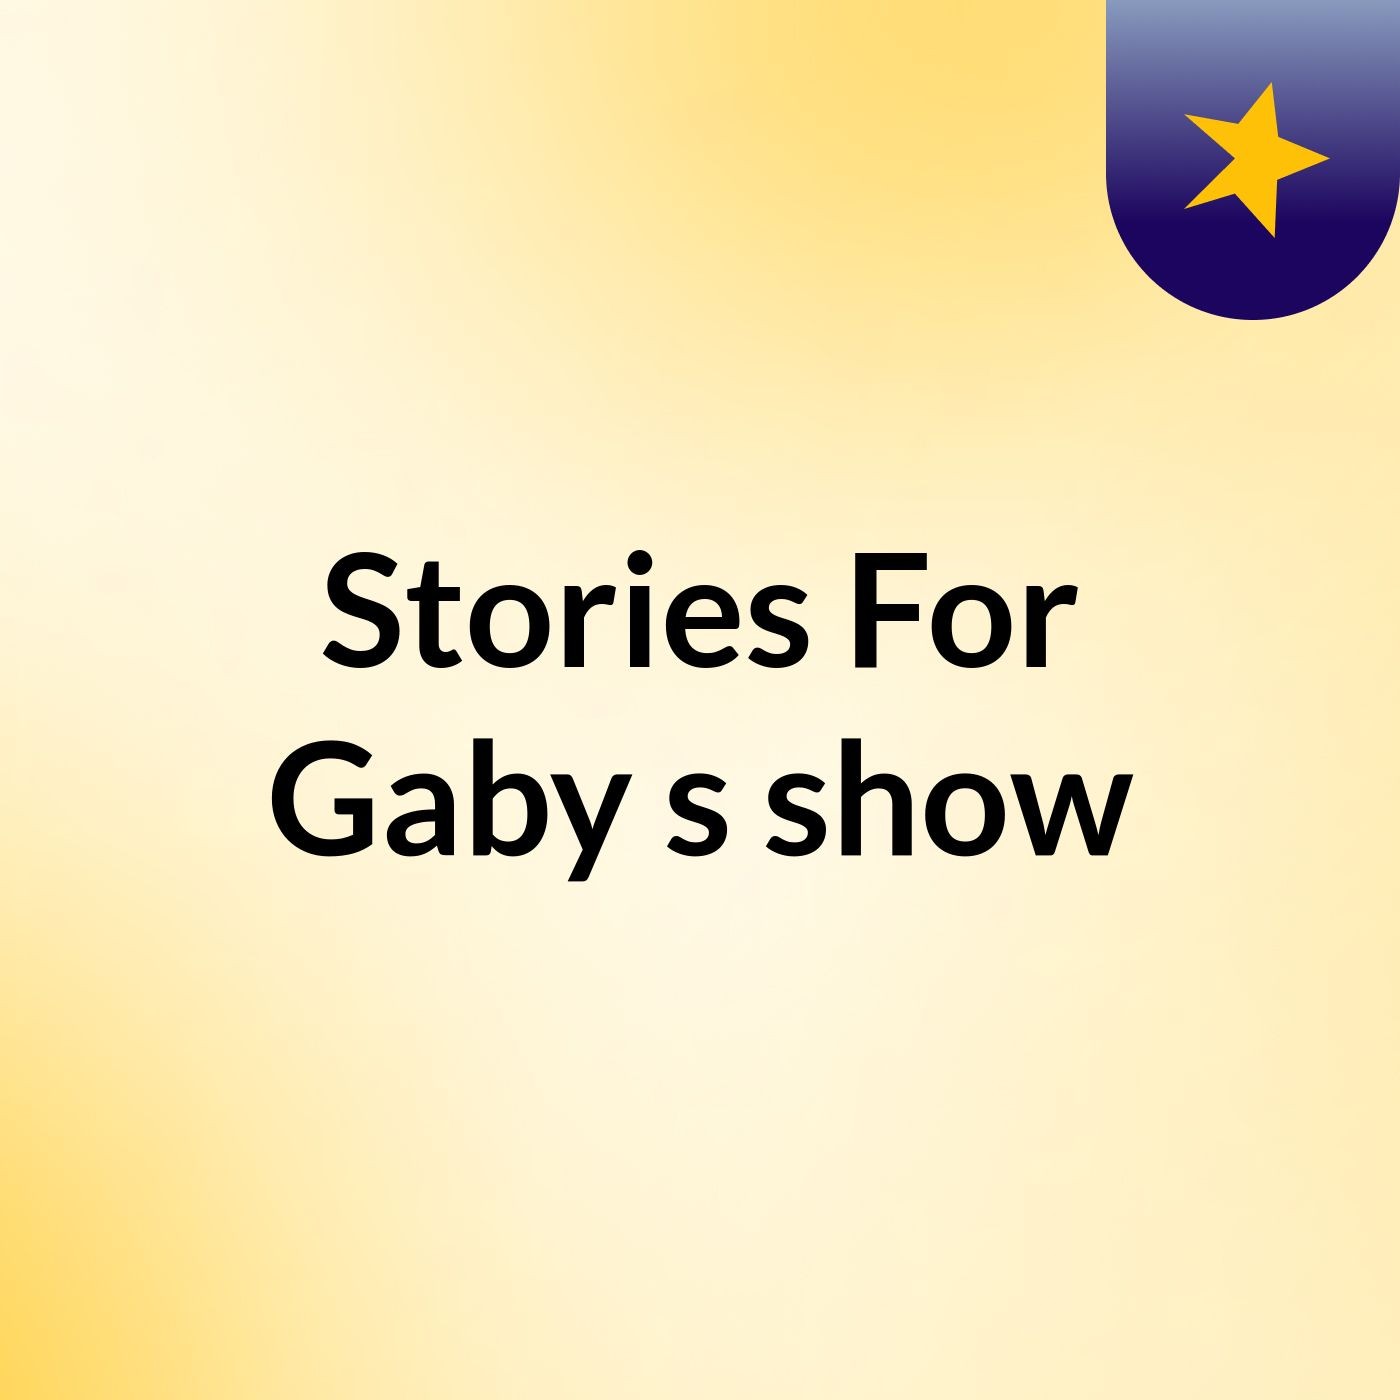 Stories For Gaby's show